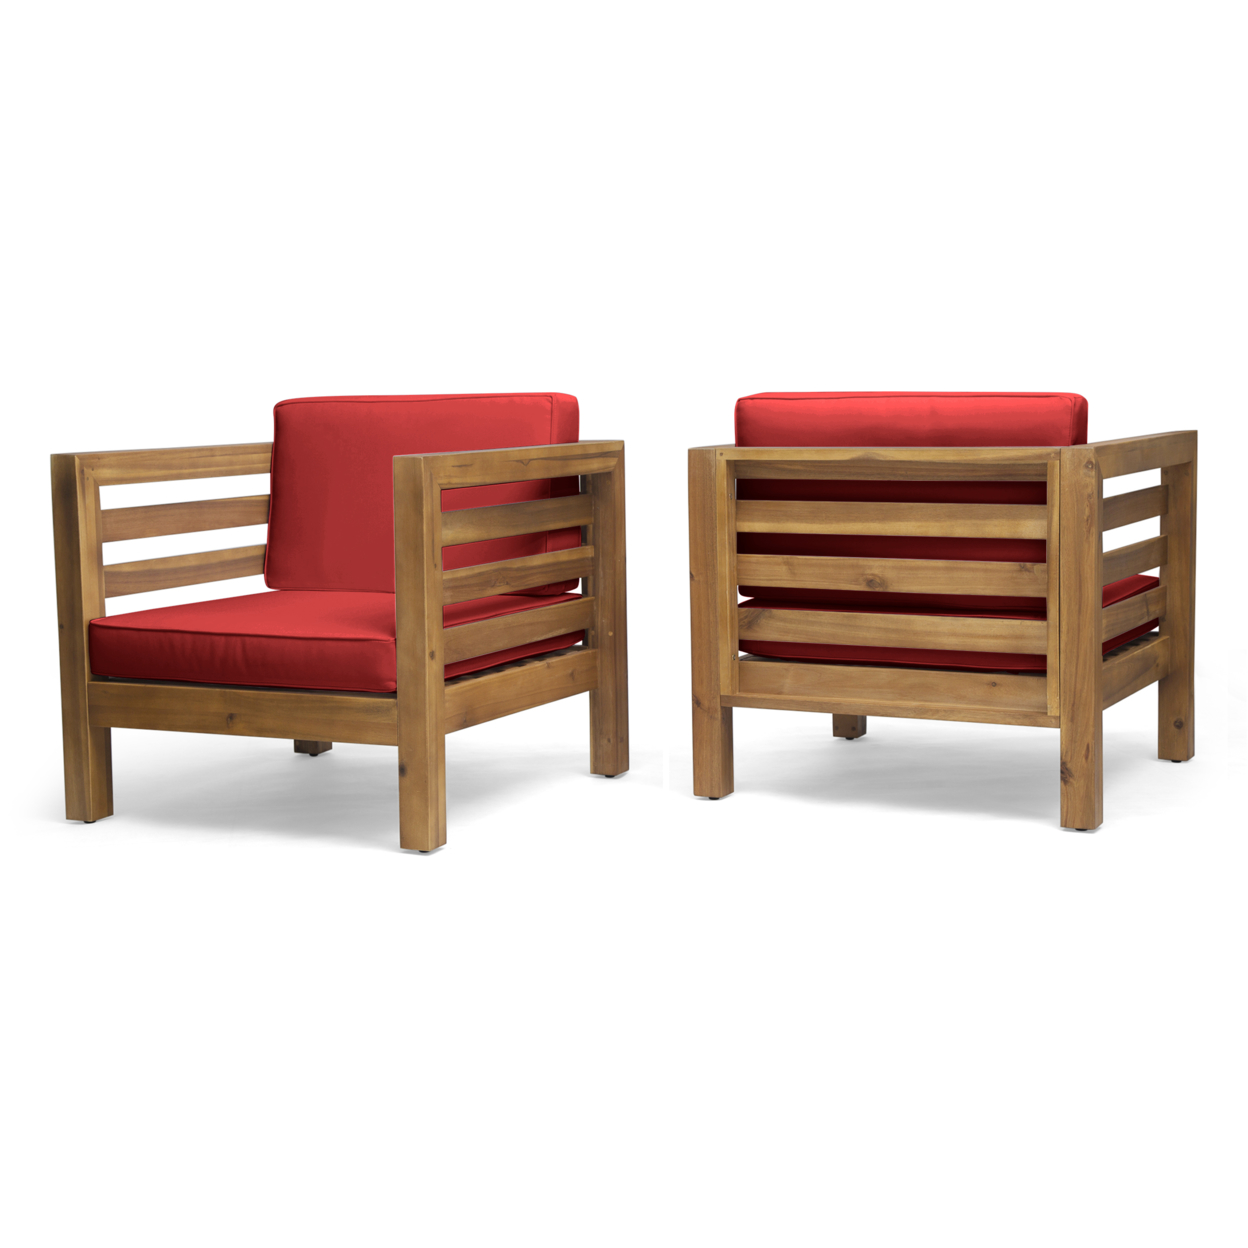 Louise Outdoor Acacia Wood Club Chairs With Cushions (Set Of 2) - Teak Finish + Red